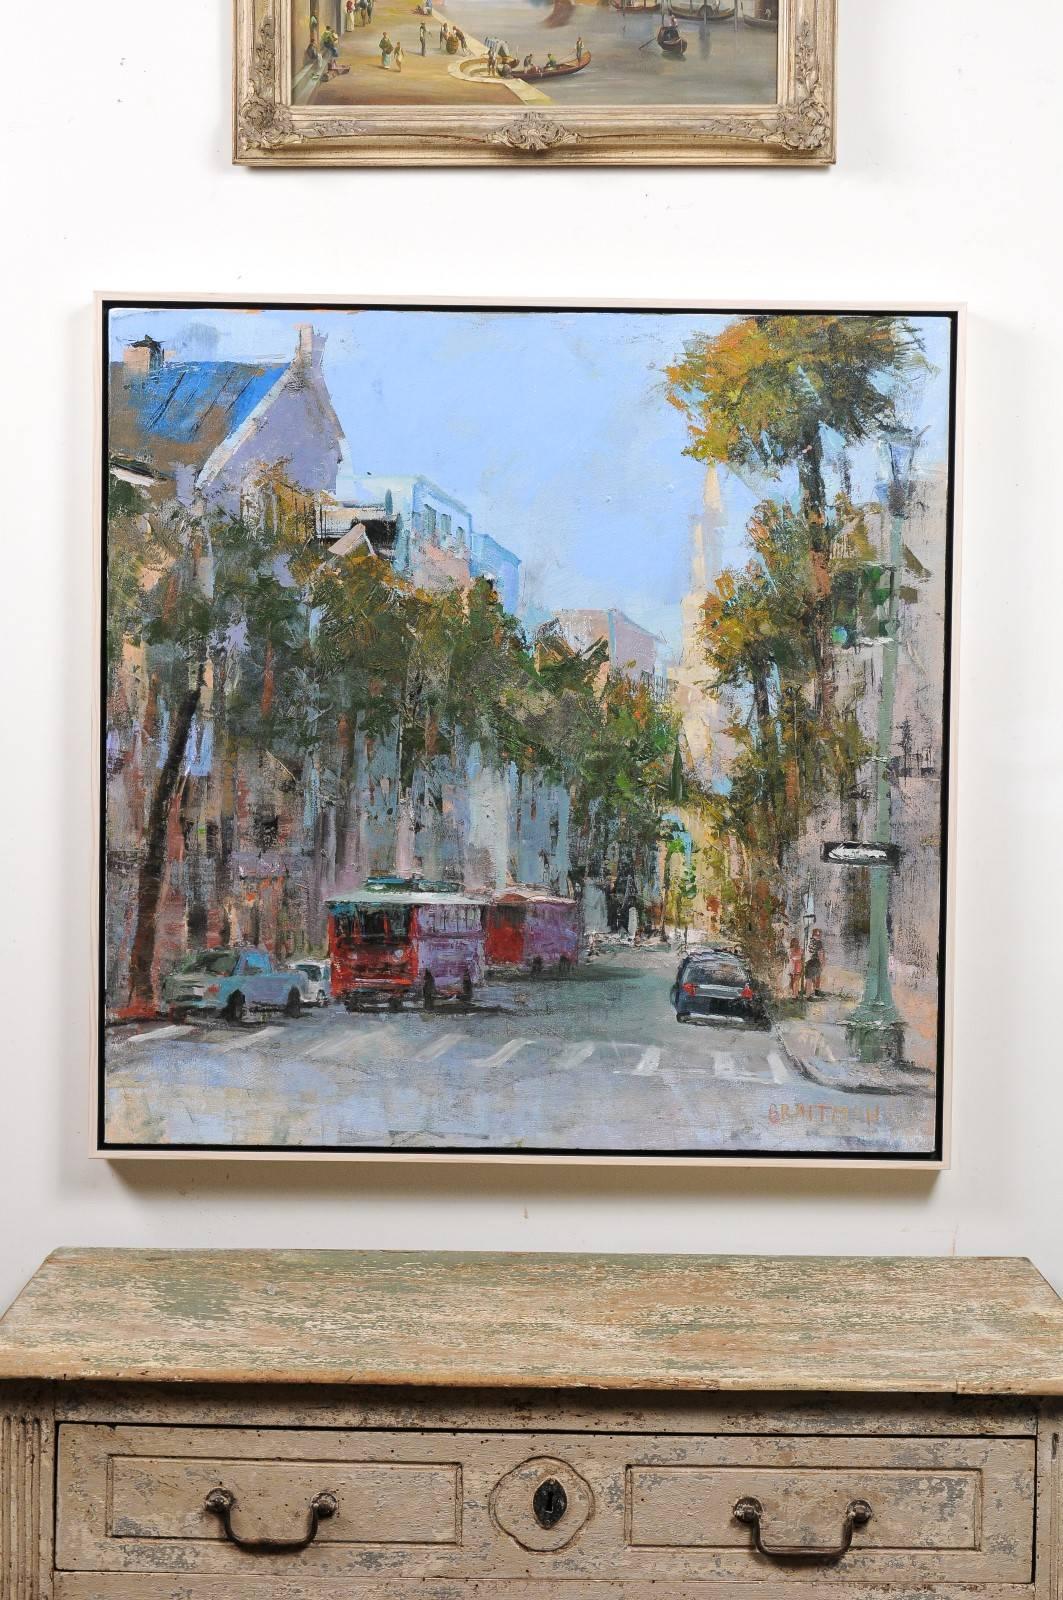 'Charleston Desire II', is a contemporary painting created by American artist Andy Braitman. This square format cityscape features a view of Charleston, with its recognizable church steeple discreetly evoked in the background, while two red busses